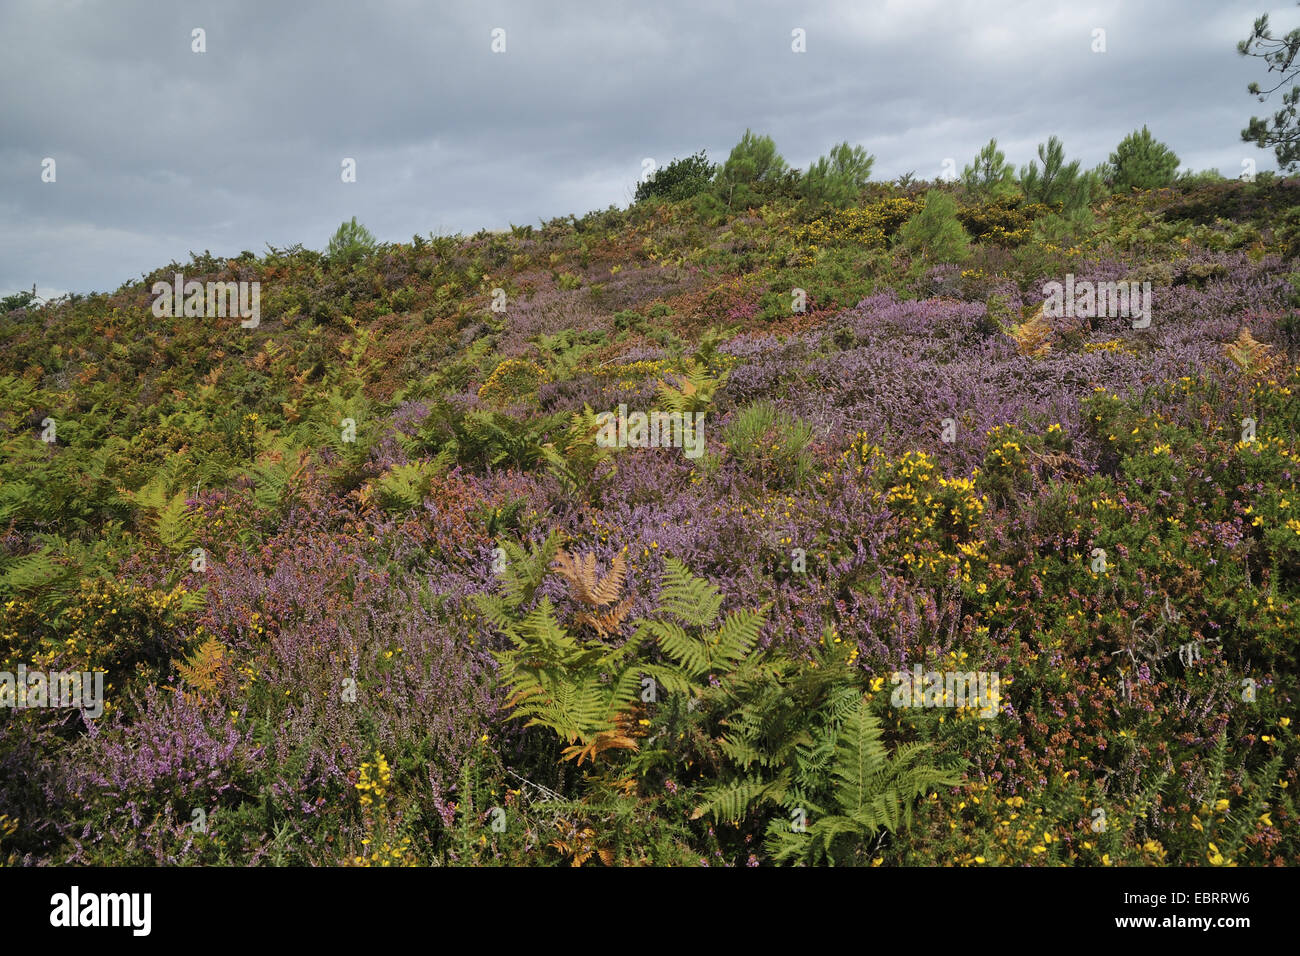 blooming heath, furze and fern, France, Brittany, Erquy Stock Photo